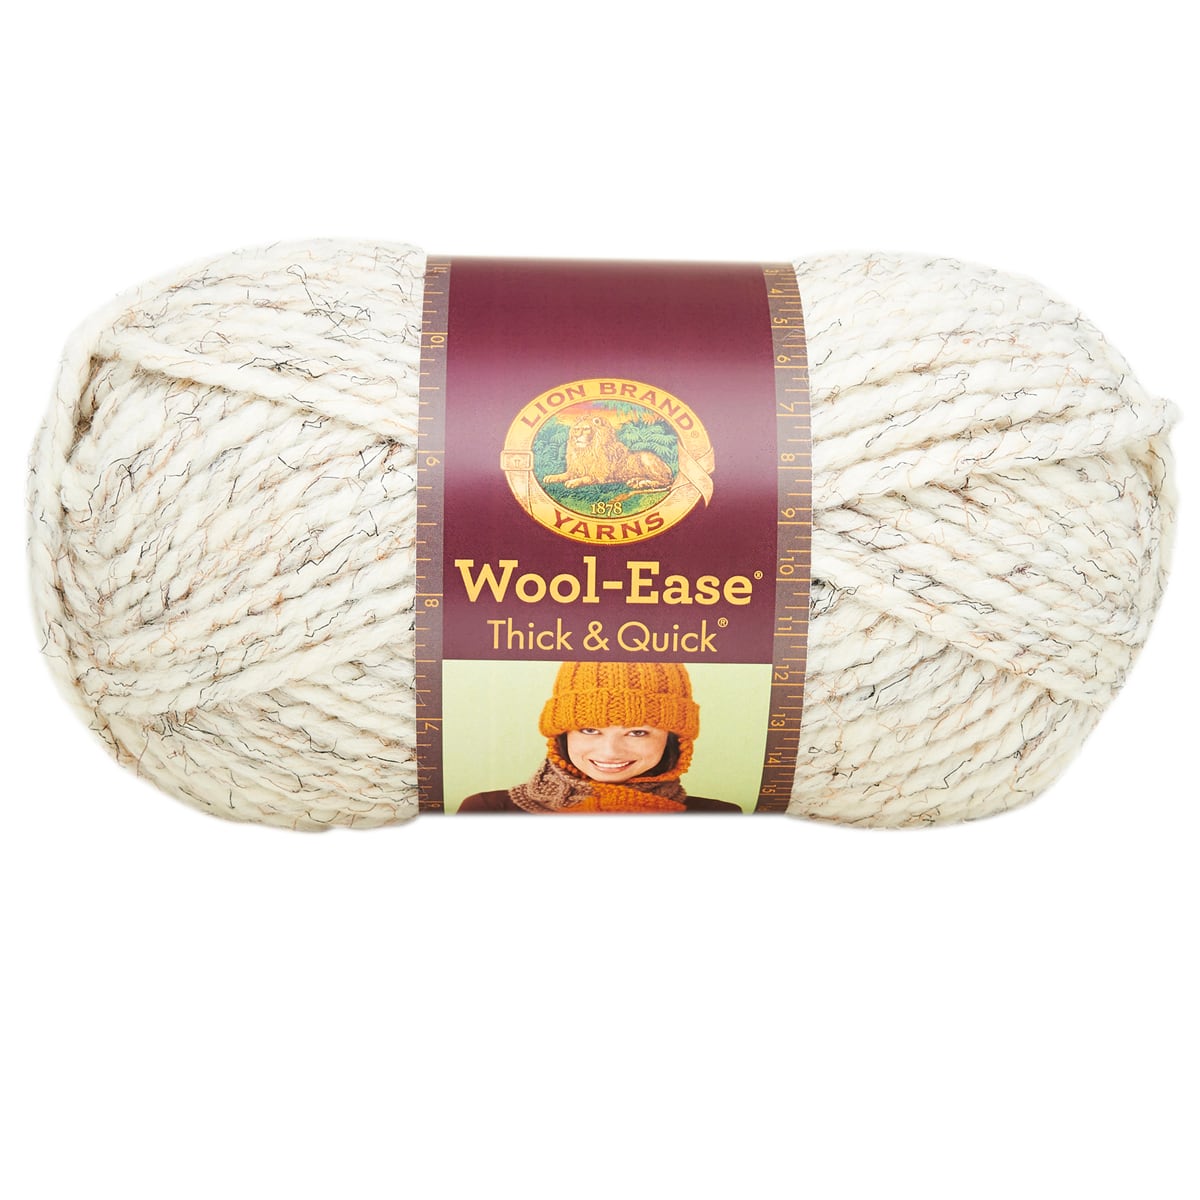 Lion Brand Wool-Ease Thick & Quick Yarn-Fern, 1 count - Gerbes Super Markets